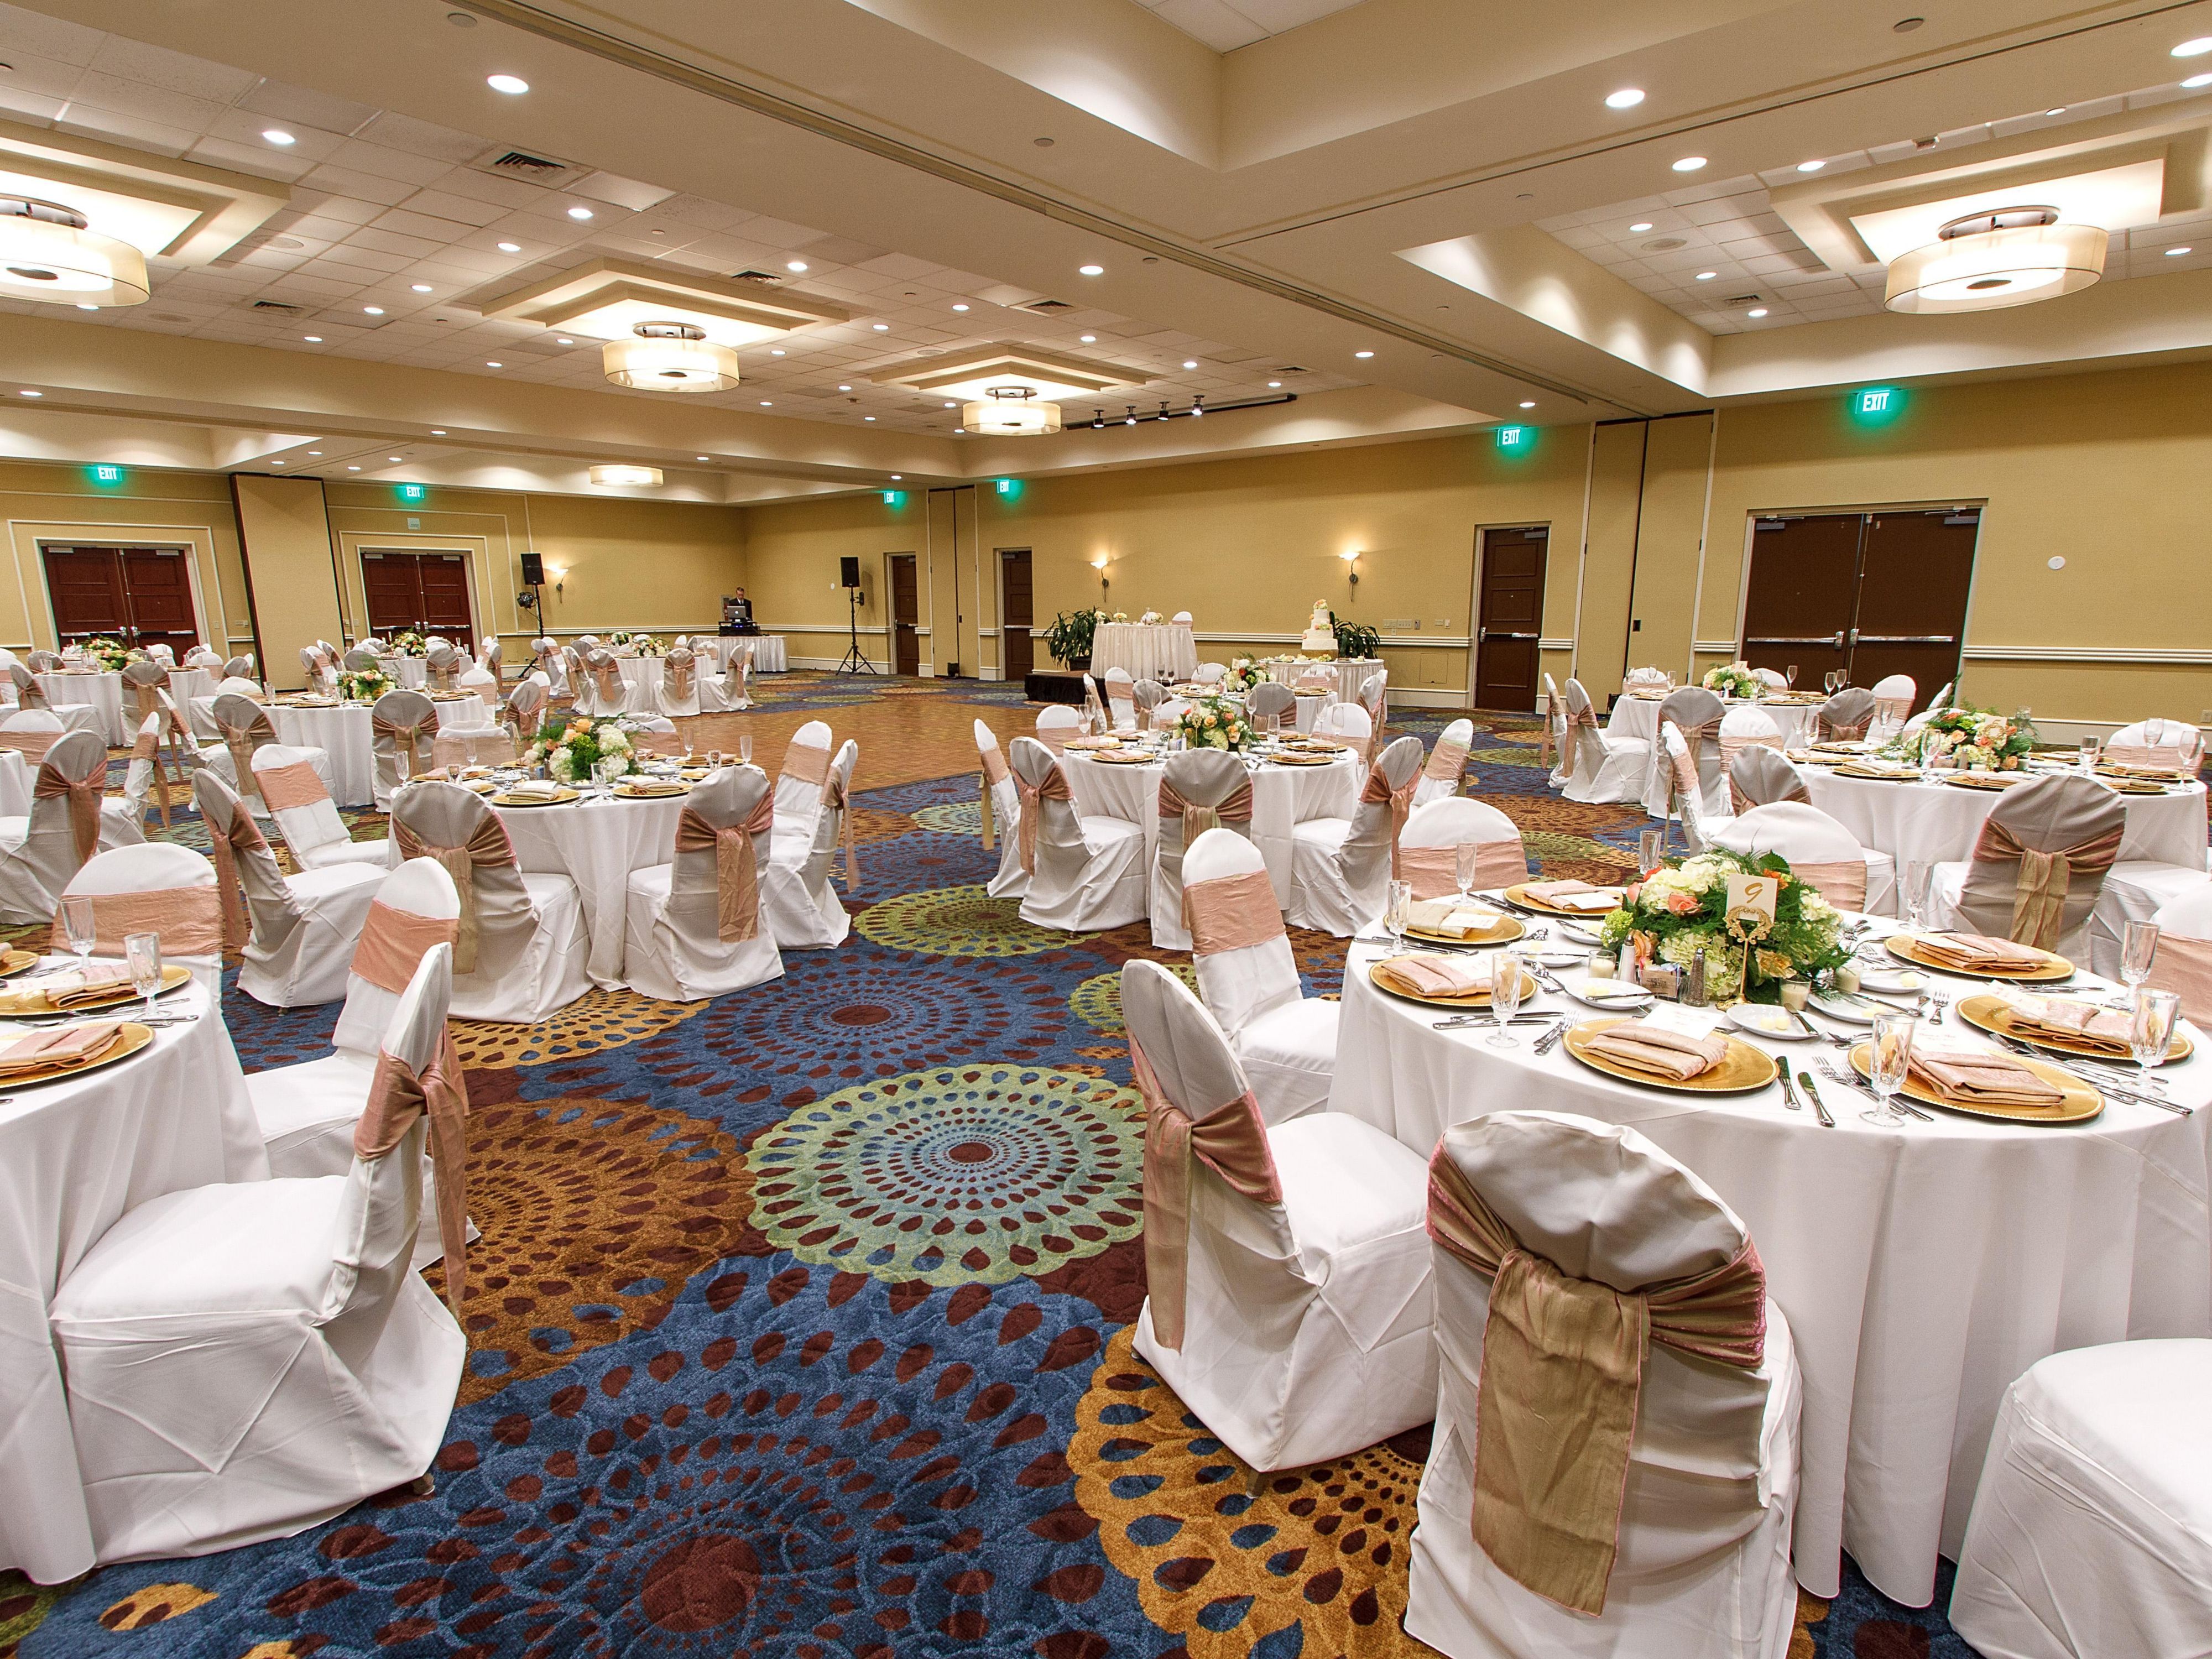 Our meeting and event space is over 12,000 square feet. We have equipment rentals, catering options, and a selection of different room setups. Call our sales team today to book your event. 